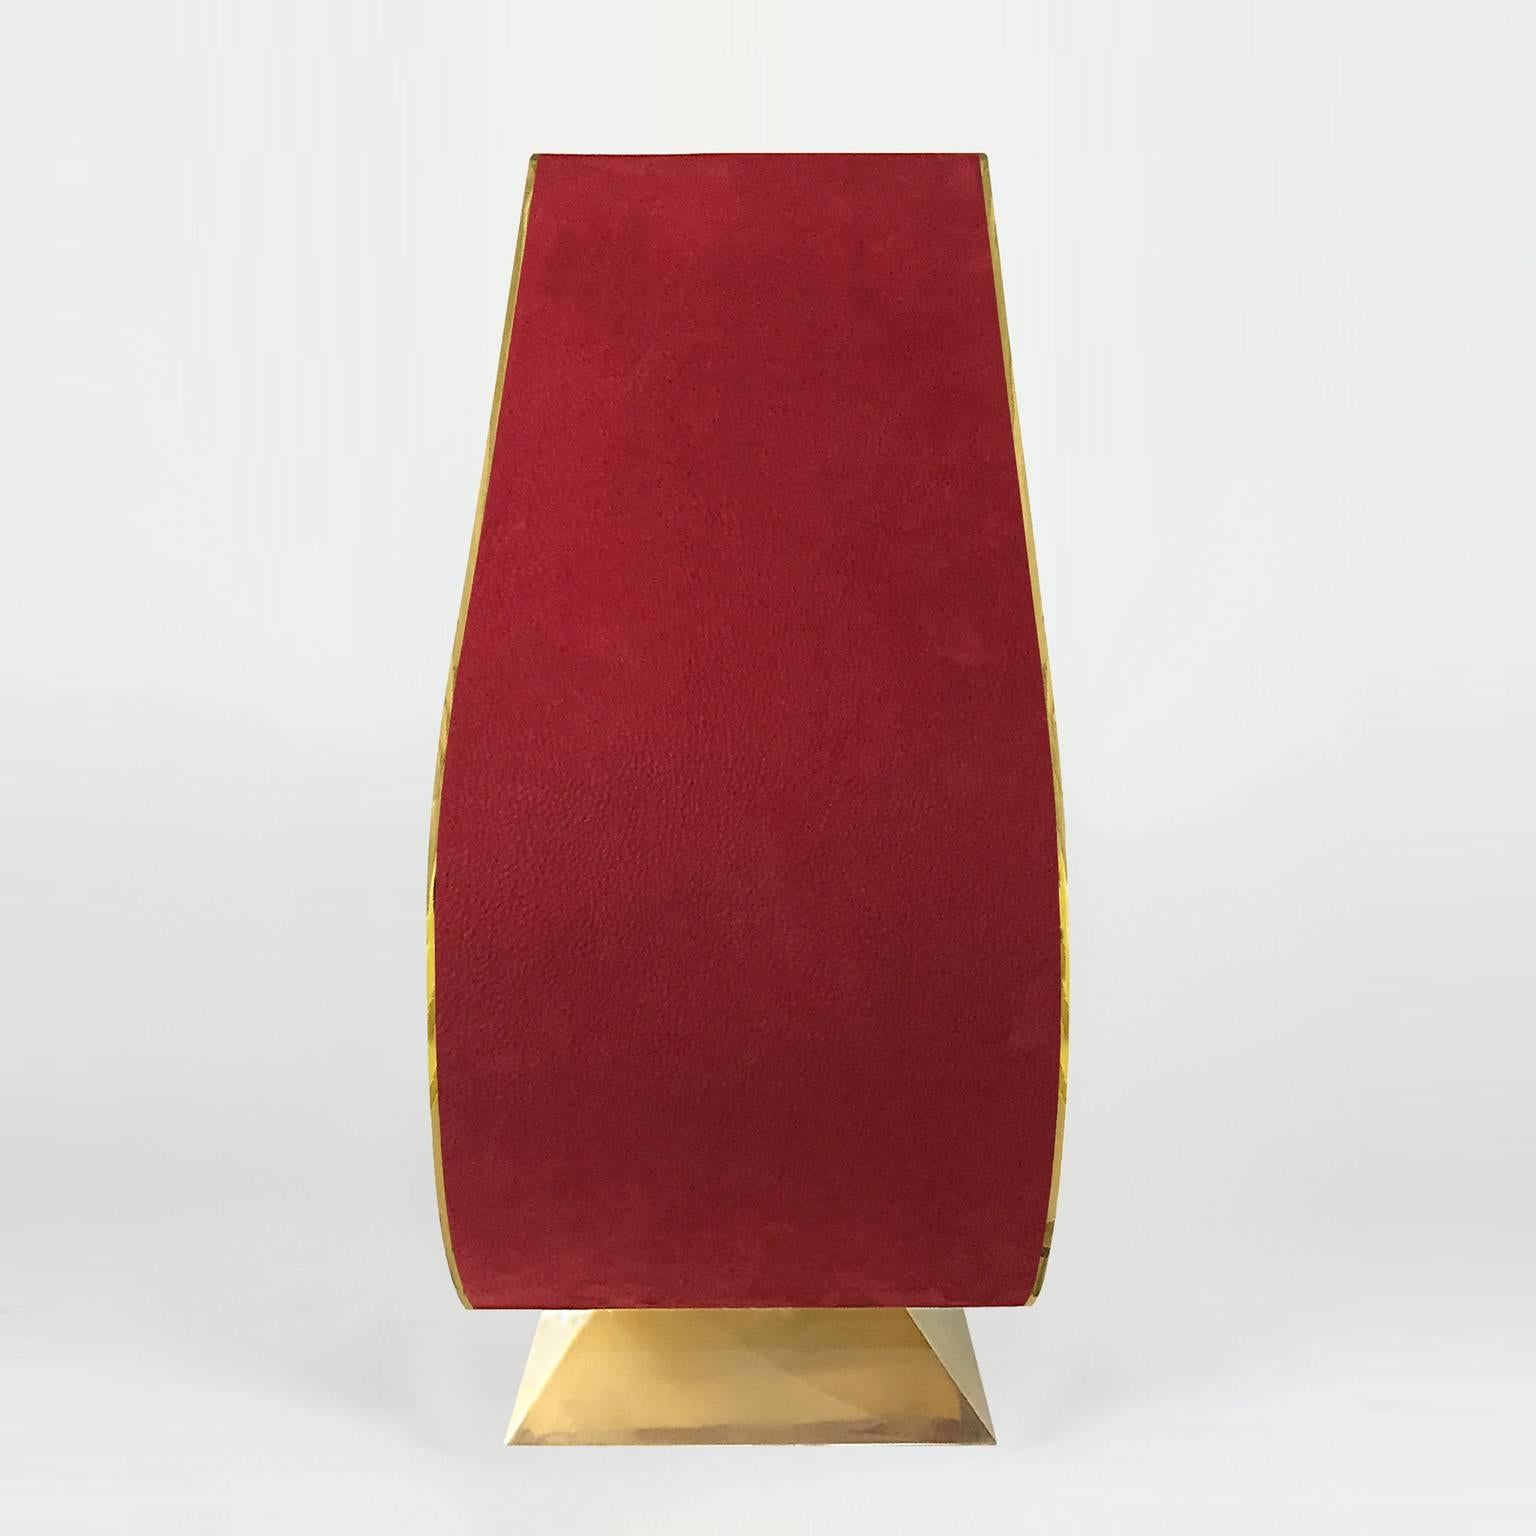 Art Deco Table Lamp 'Kappasigma' N°1/20 by Antoine Vignault, OΔK Limited Edition For Sale